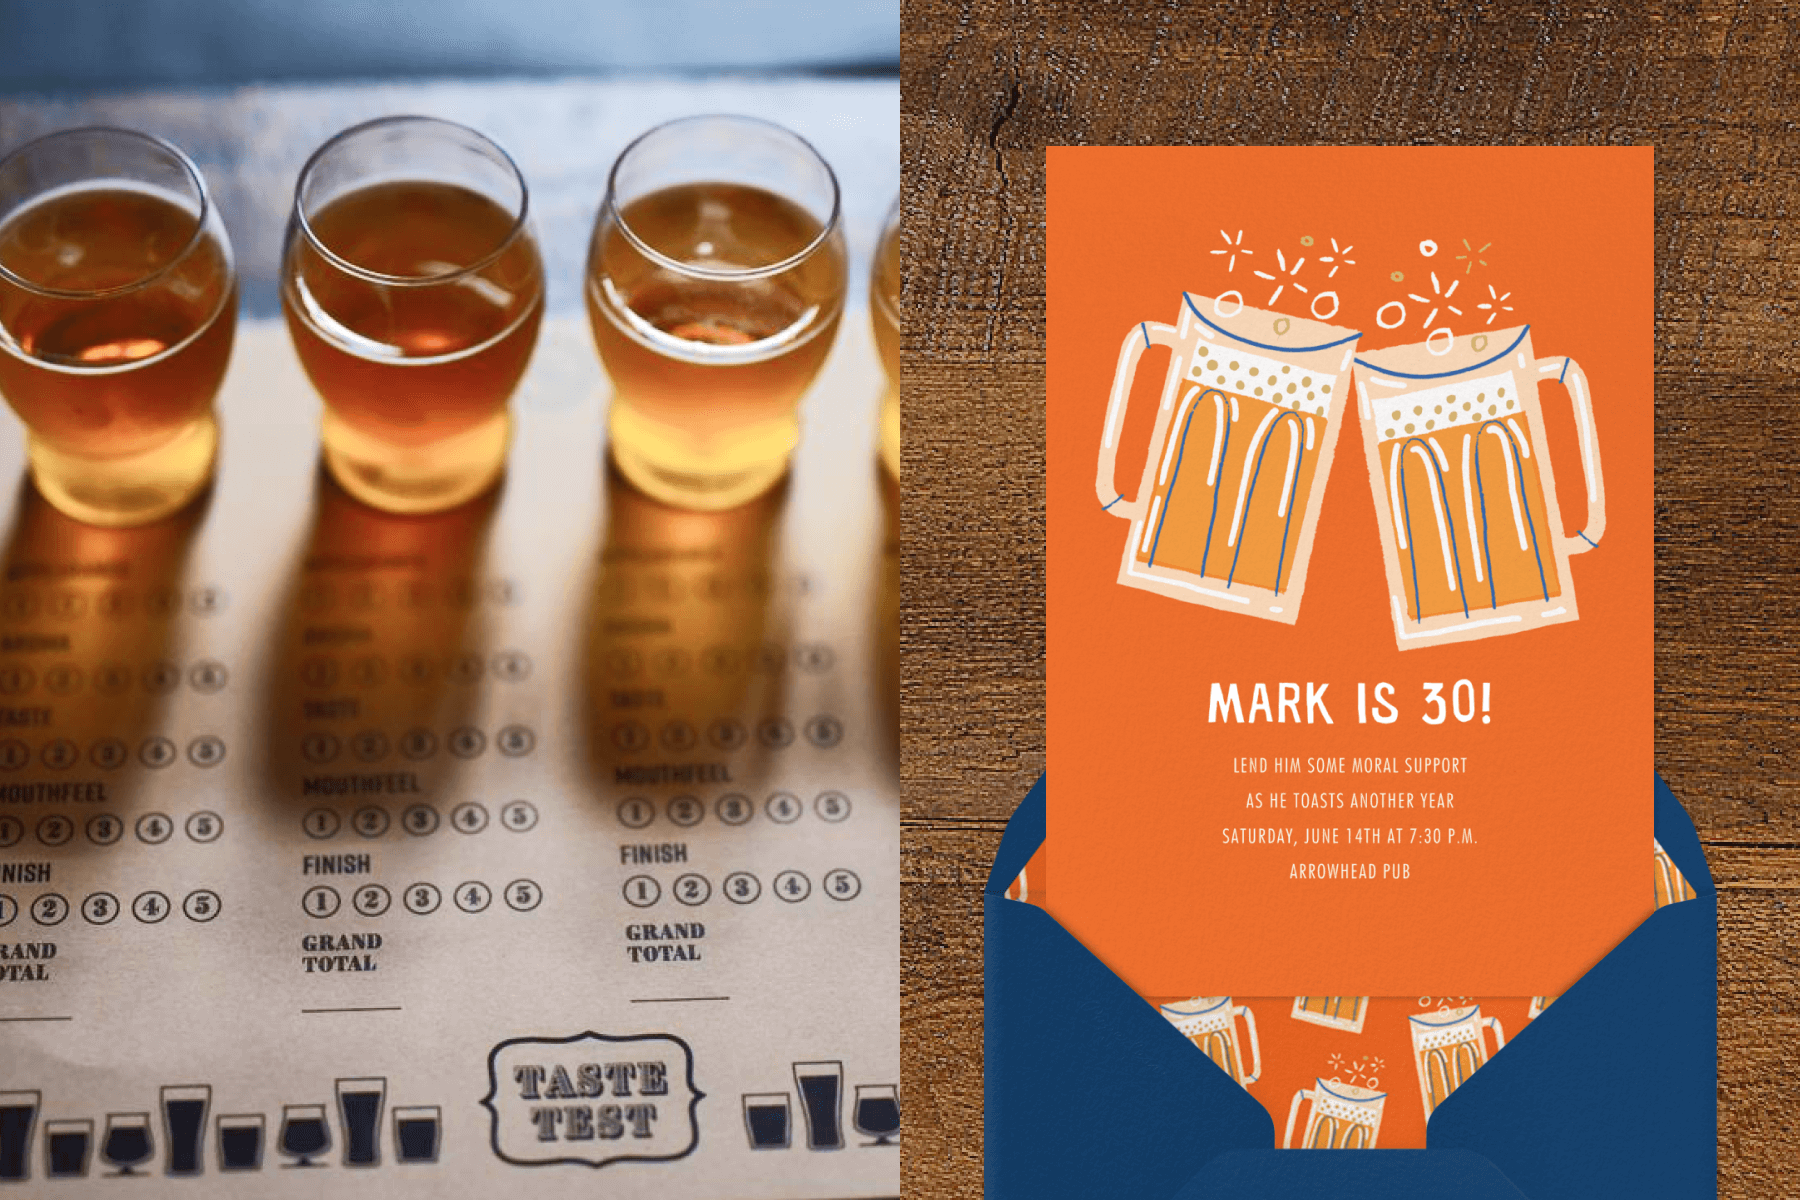 Left: A tasting flight of beer rests on a scorecard. Right: An orange 30th birthday invitation has an illustration of two beer mugs clinking above a navy envelope with matching liner.